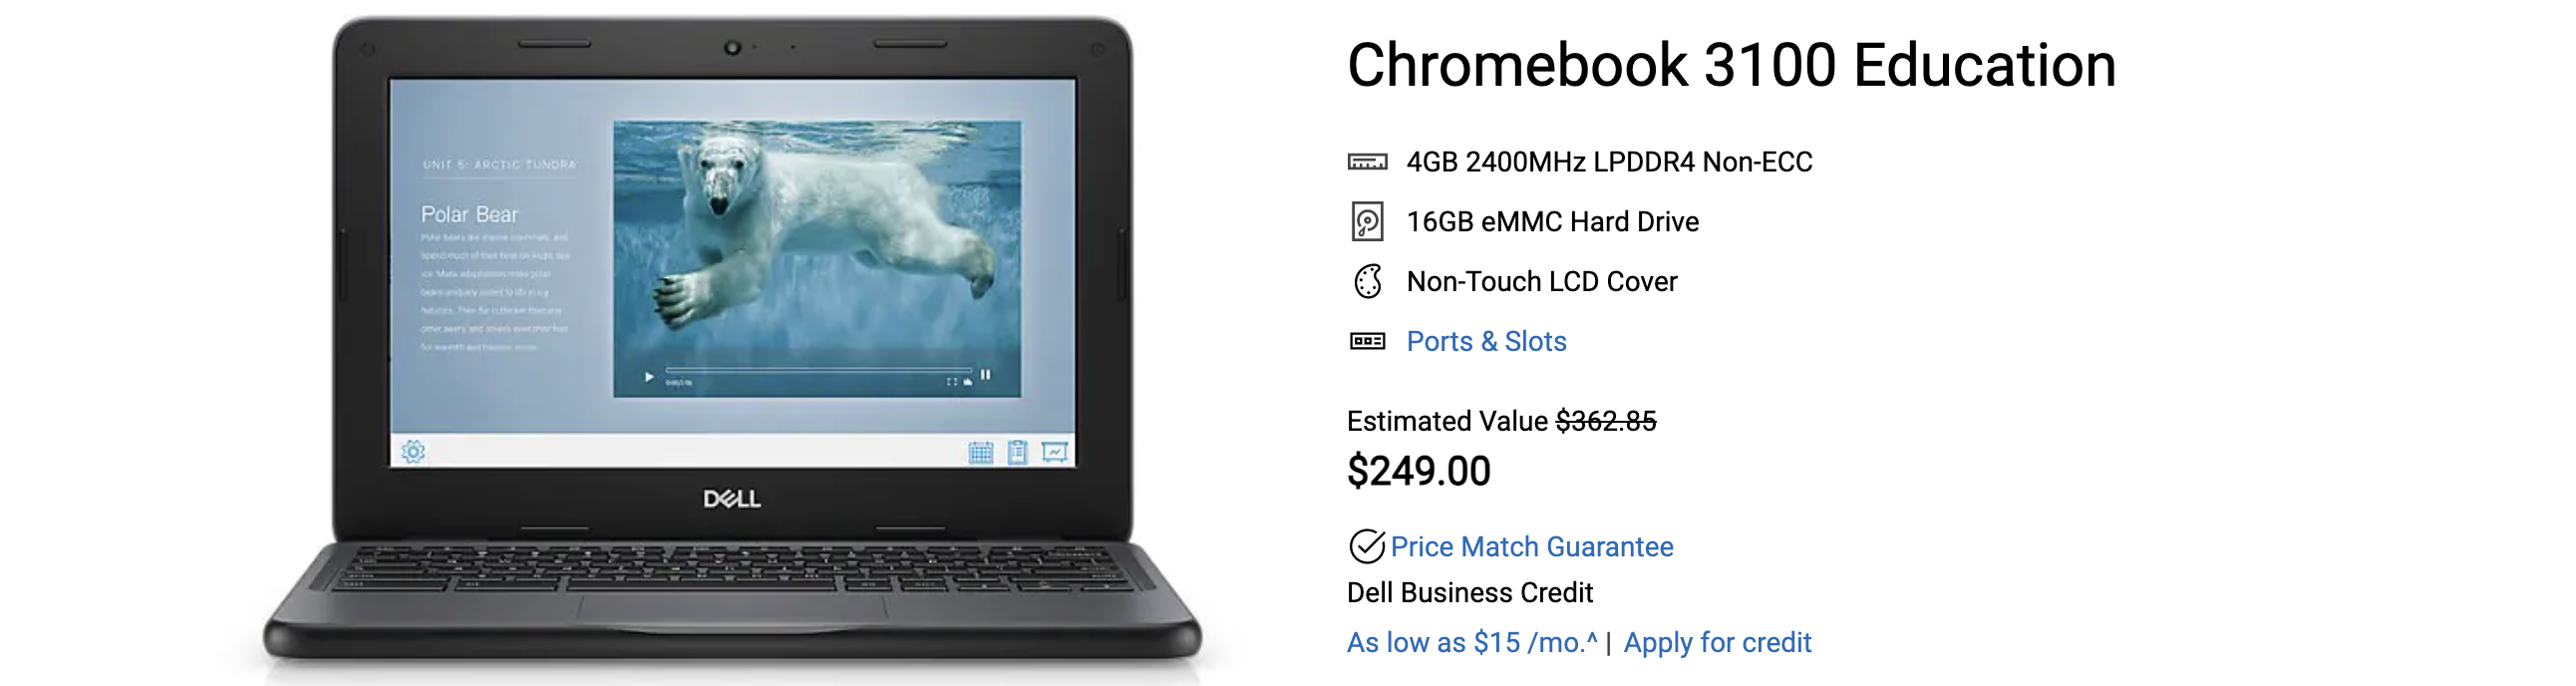 Dell Chromebook Costs